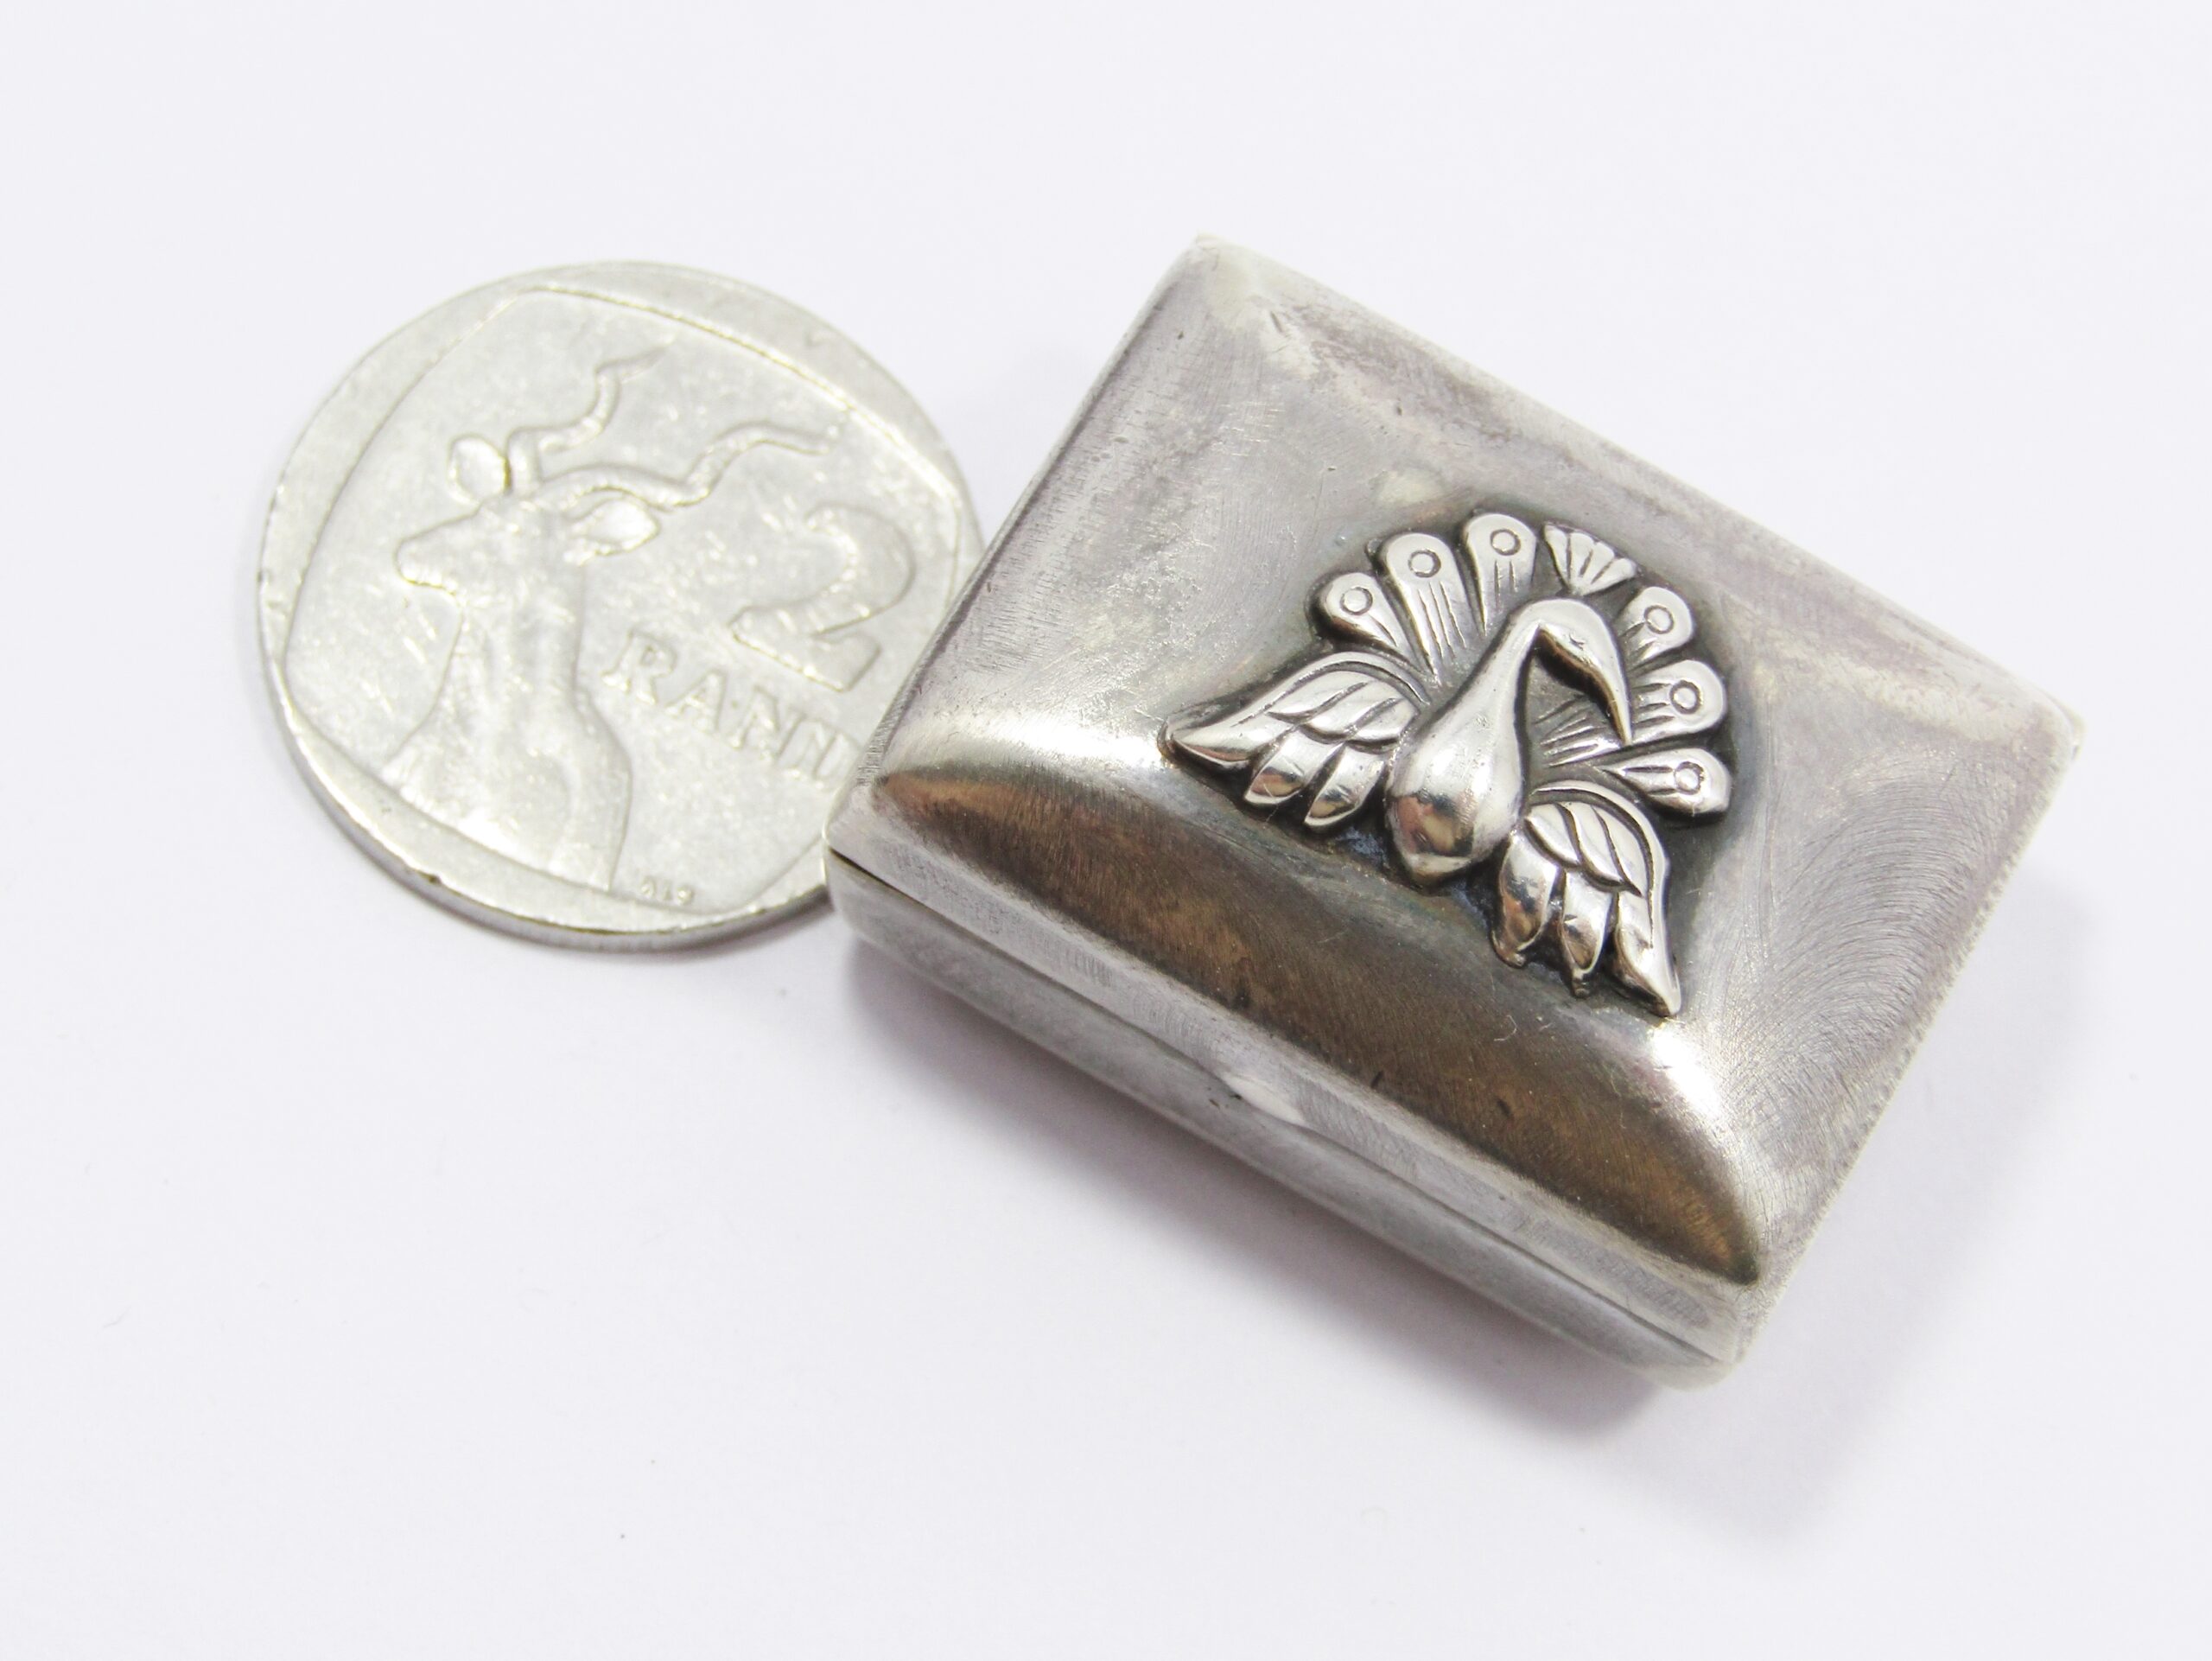 A Gorgeous Vintage Peacock Design Pill Box In 800 Silver